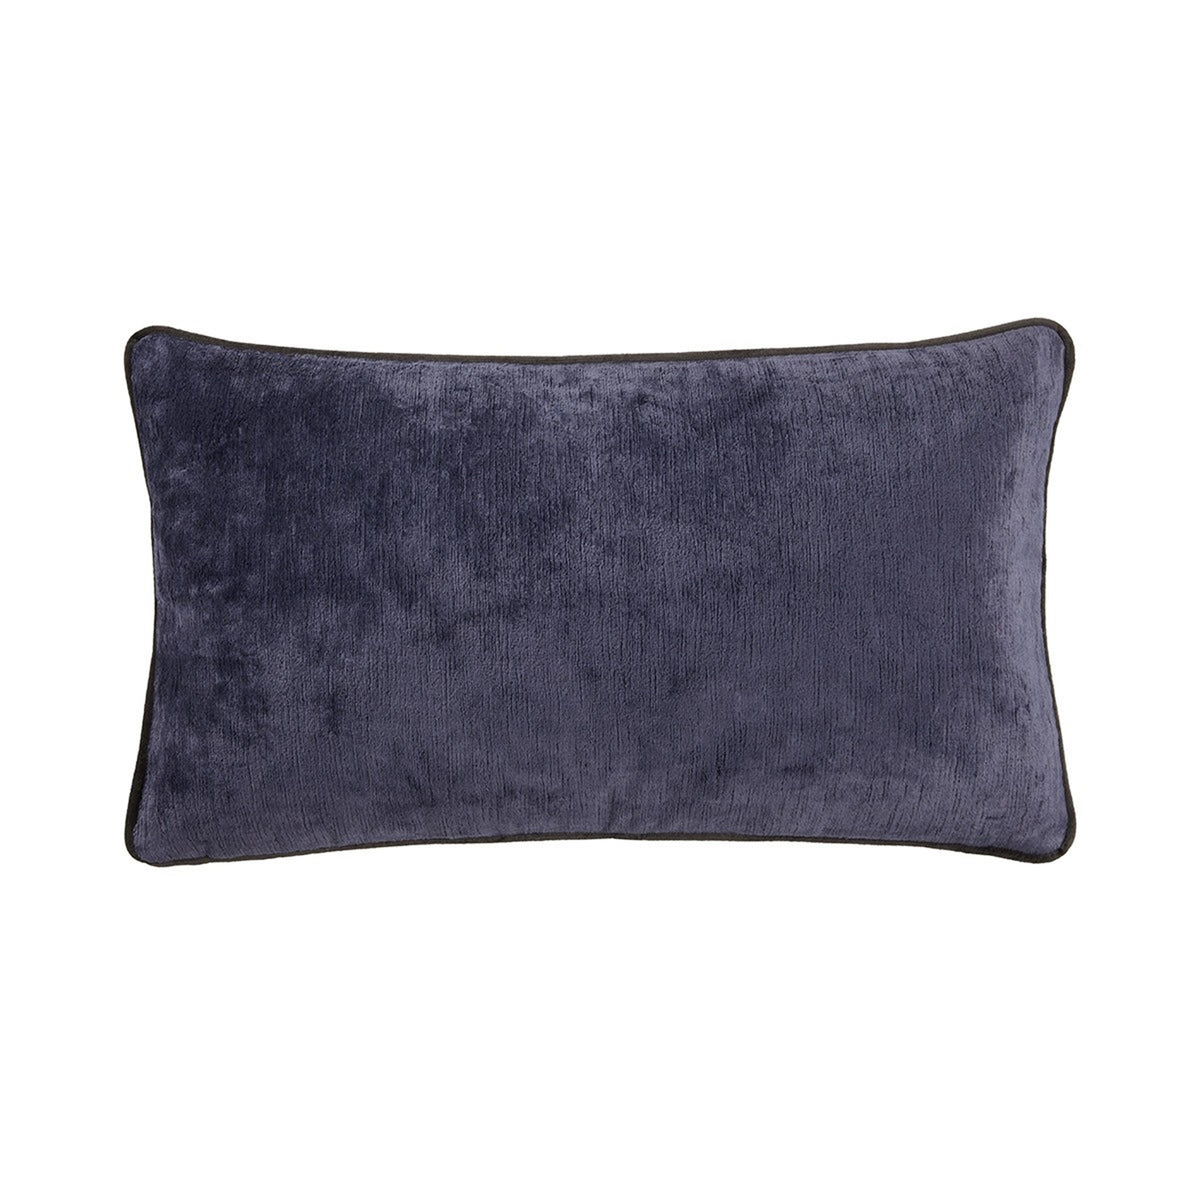 Silo Image of Yves Delorme Iosis Boromee Rectangle Decorative Pillow in Encre Color